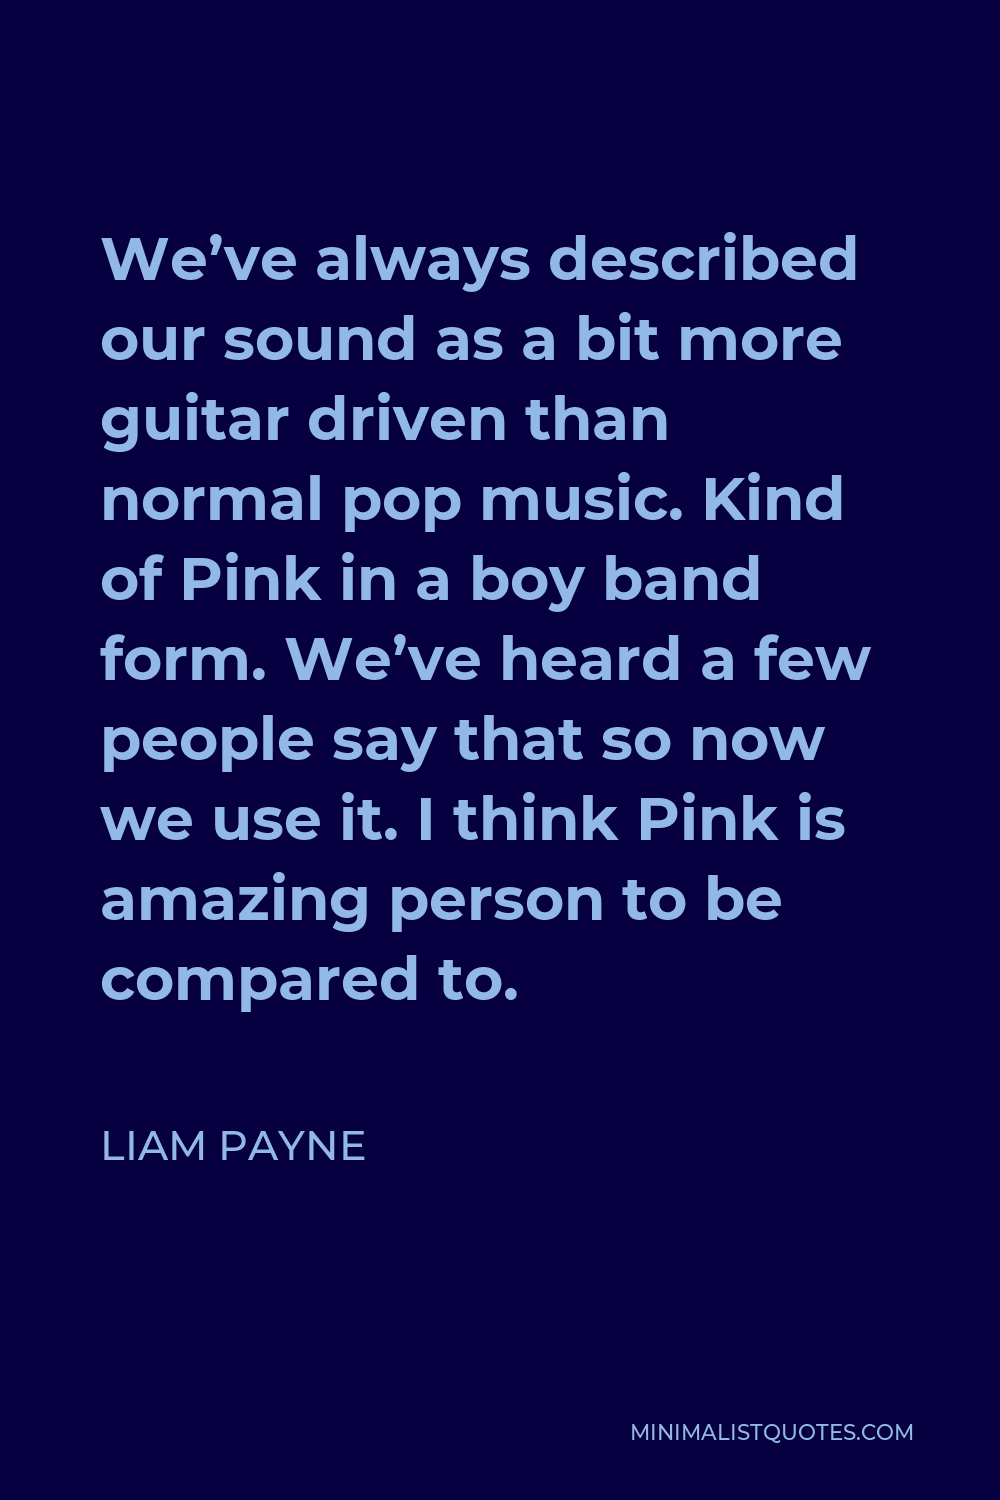 Liam Payne Quote - We’ve always described our sound as a bit more guitar driven than normal pop music. Kind of Pink in a boy band form. We’ve heard a few people say that so now we use it. I think Pink is amazing person to be compared to.